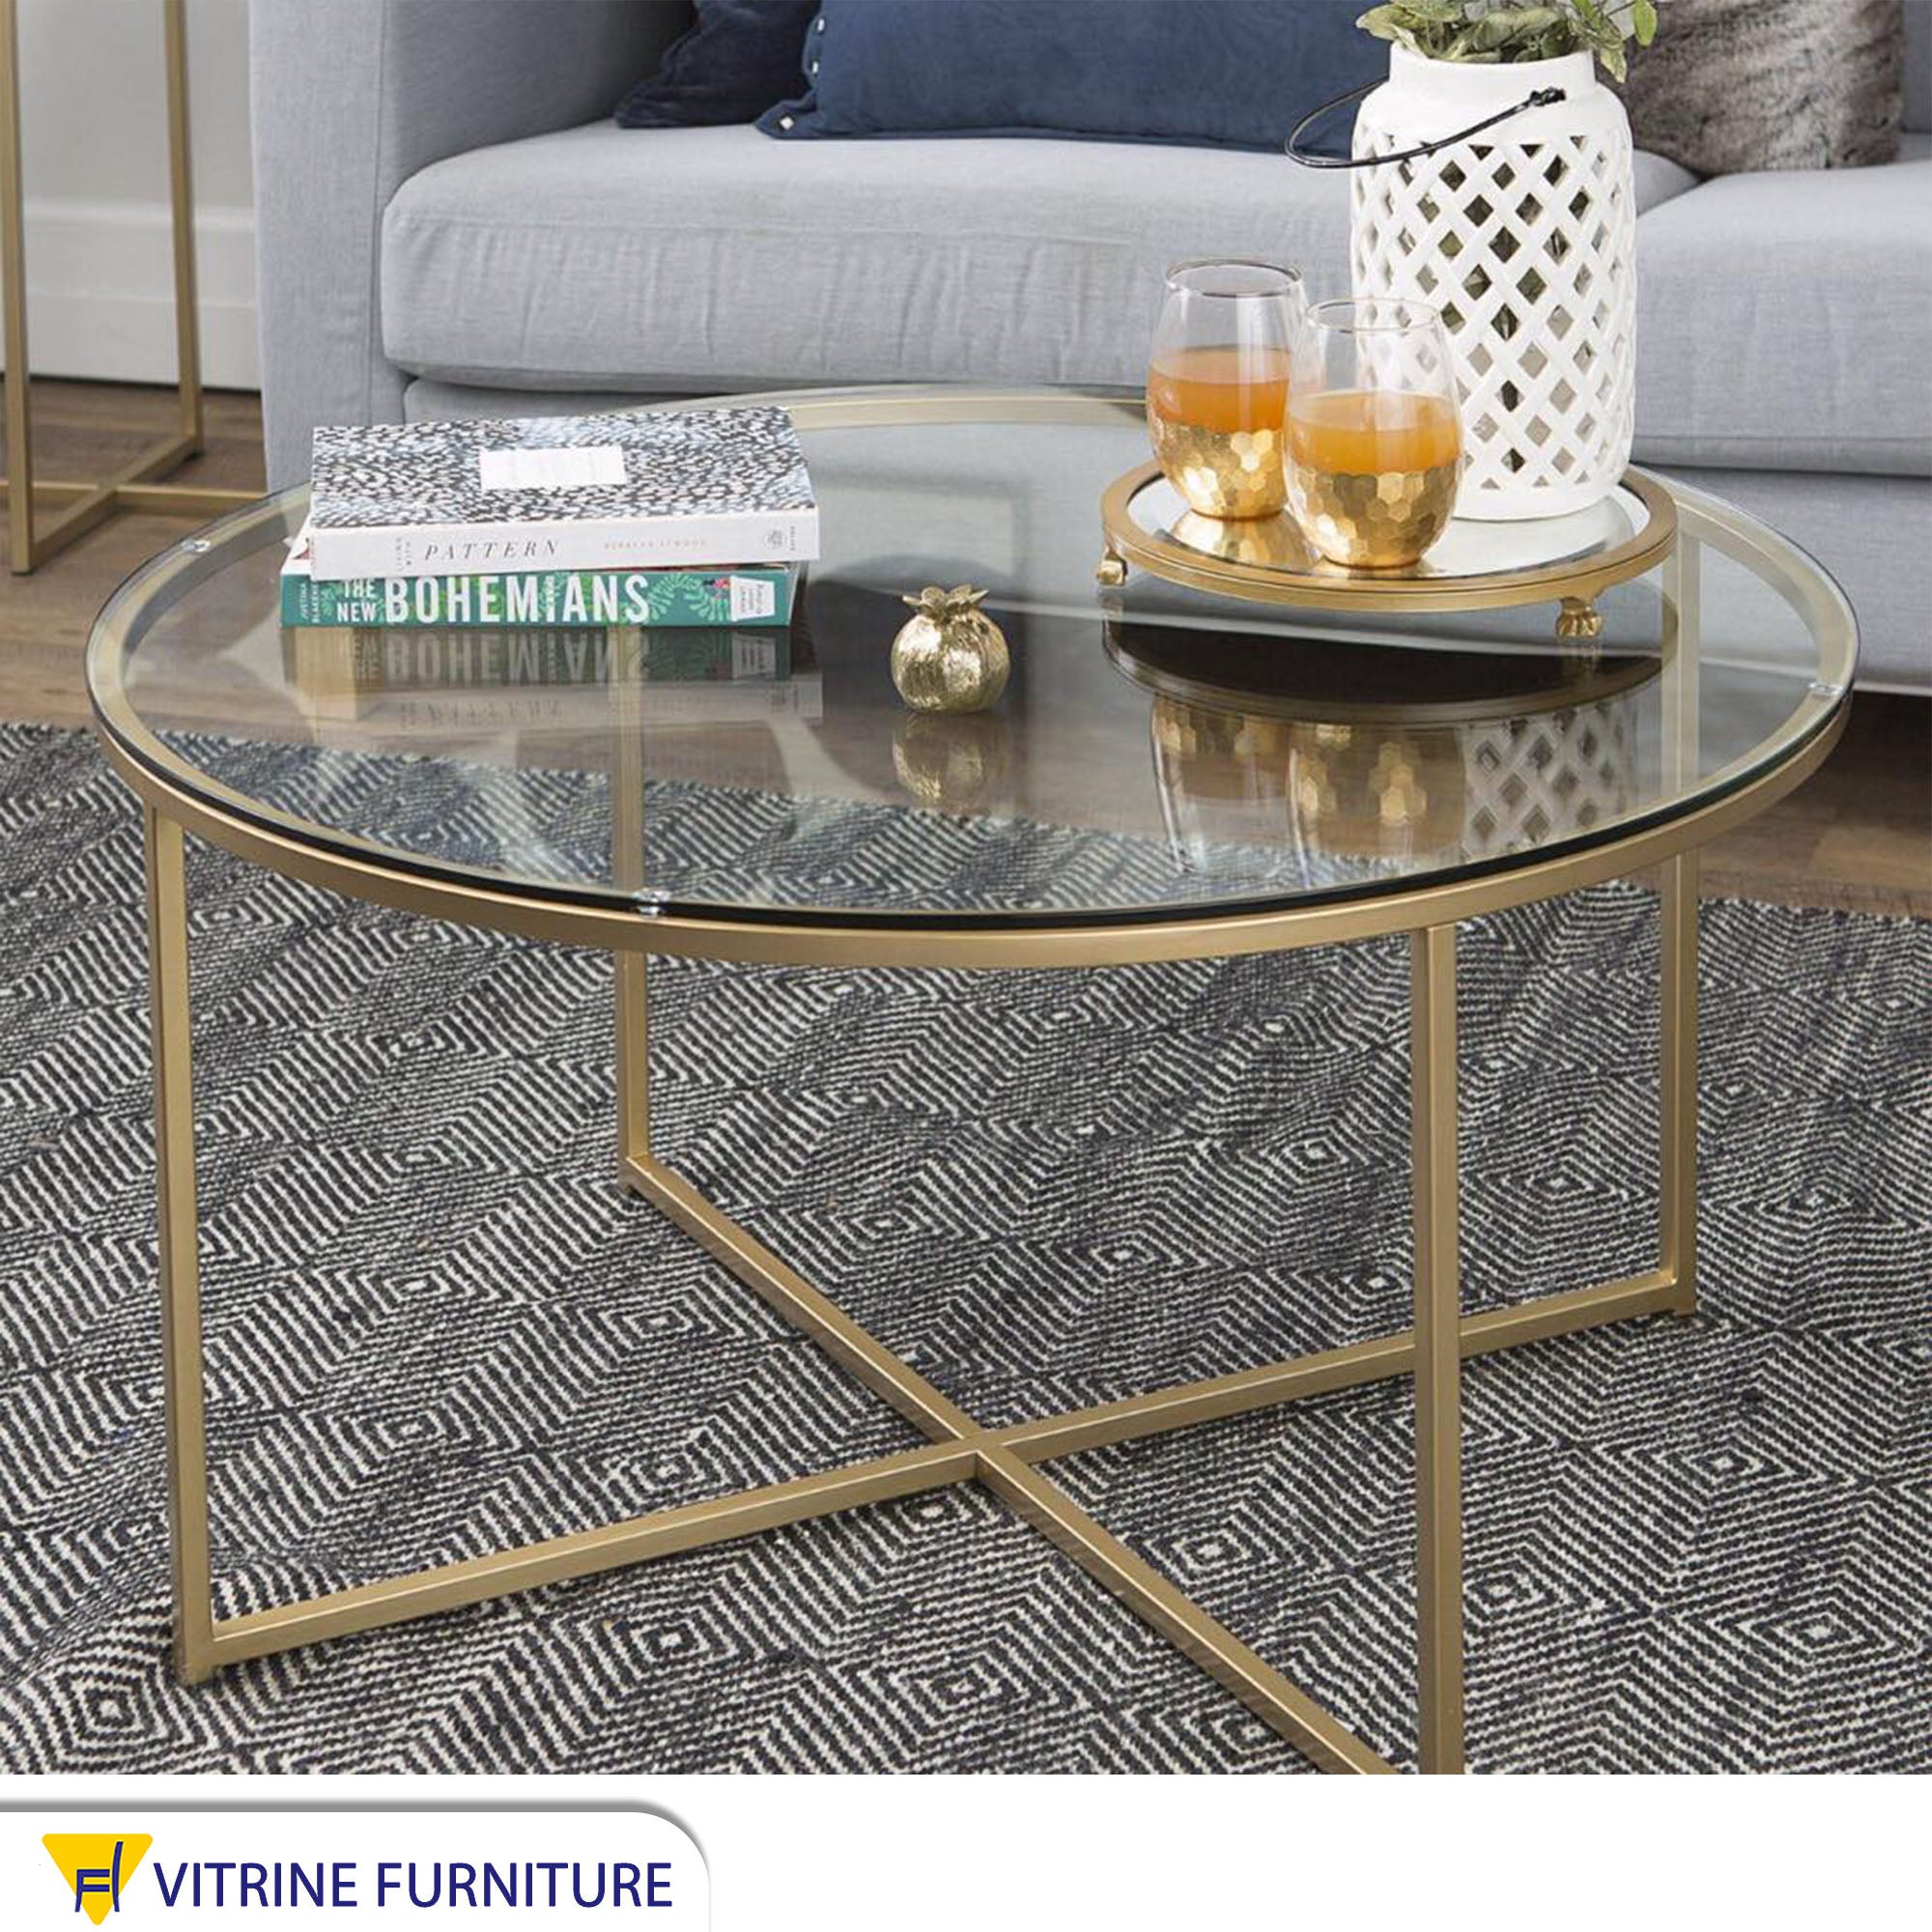 Circular table with a gold x-shaped base